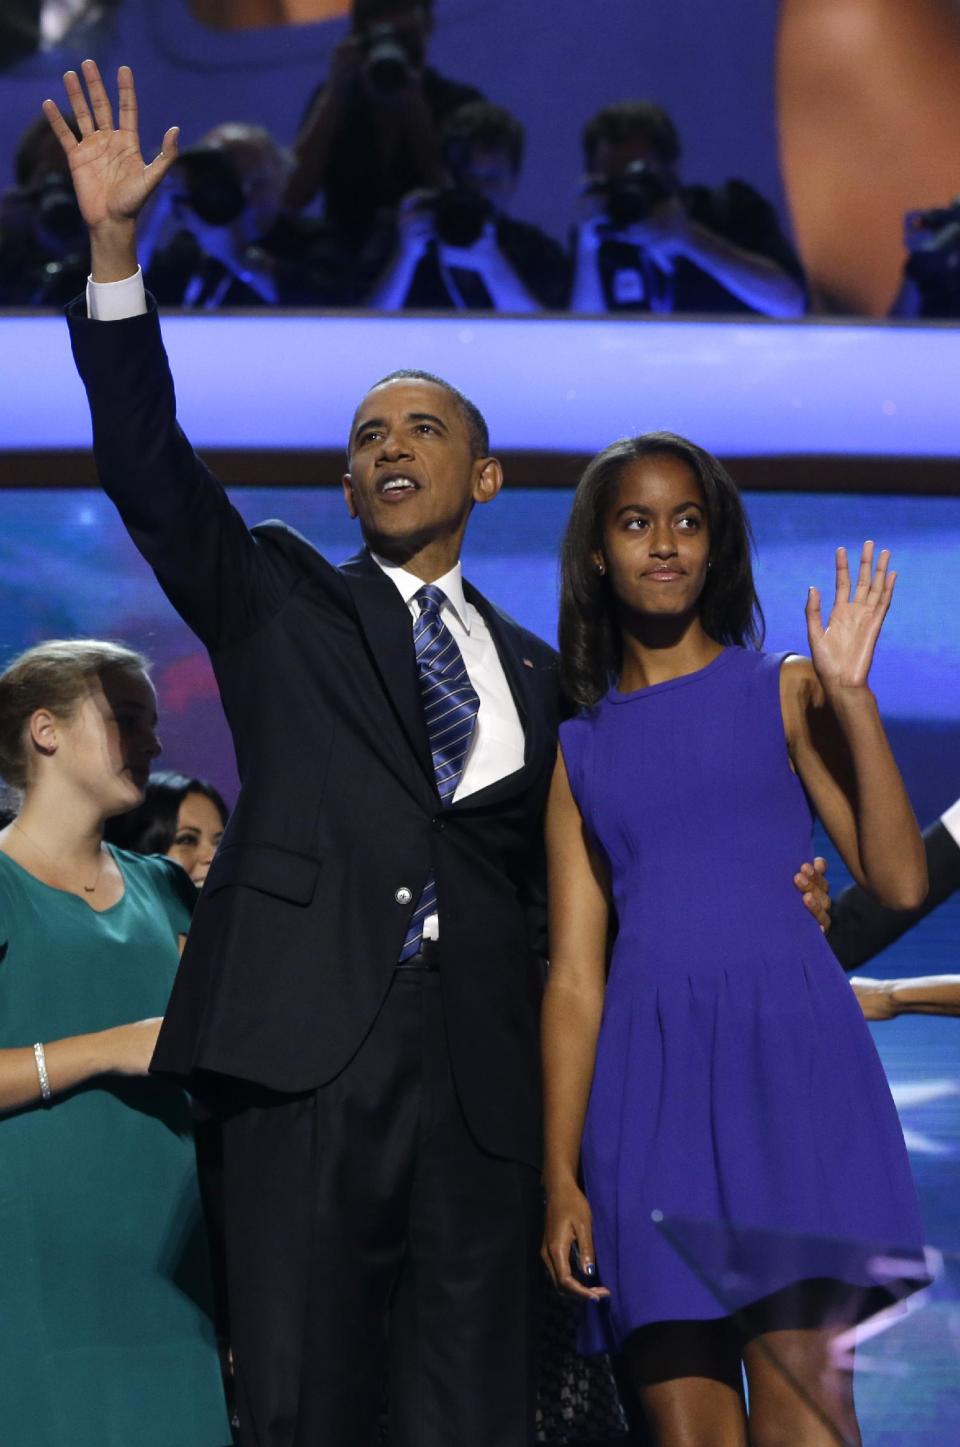 President Barack Obama and his daughter Malia wave after President Obama's speech to the Democratic National Convention in Charlotte, N.C., on Thursday, Sept. 6, 2012. (AP Photo/Charles Dharapak)